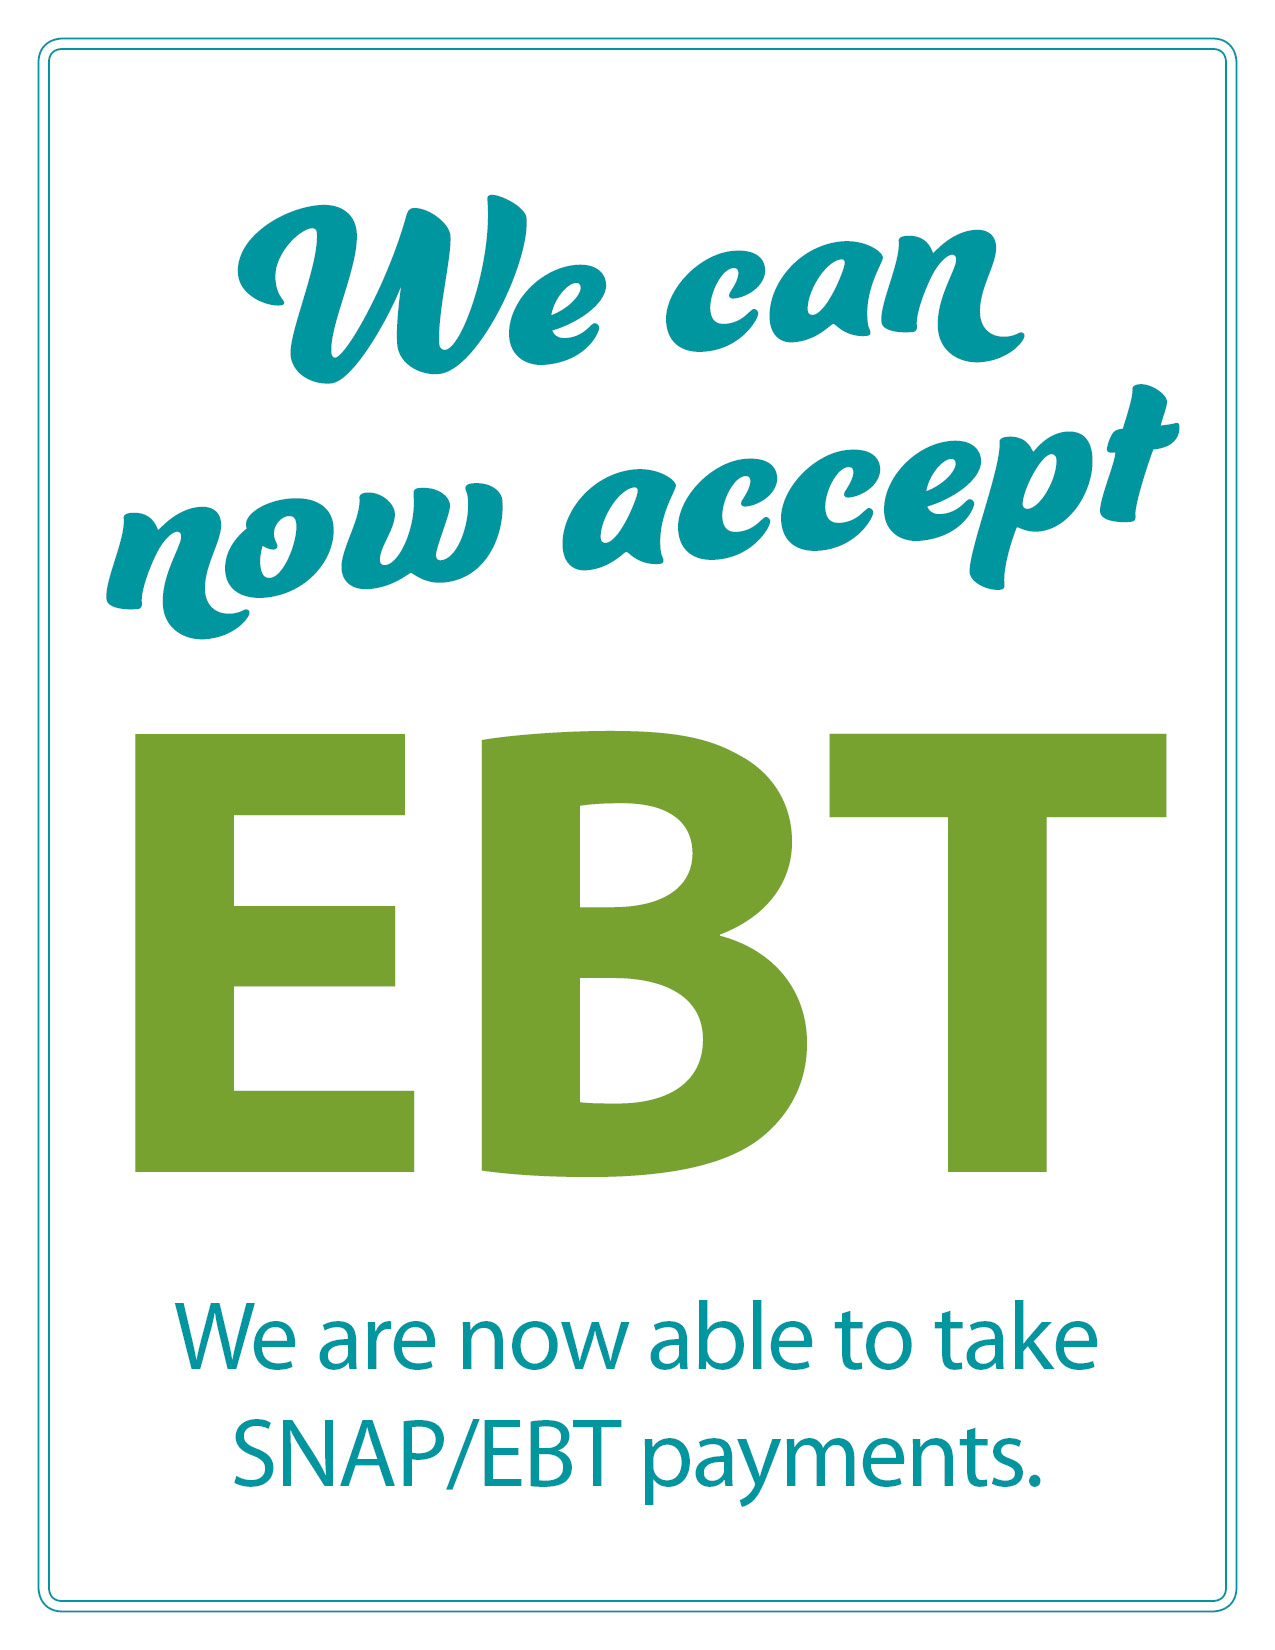 ebt sign now accepting